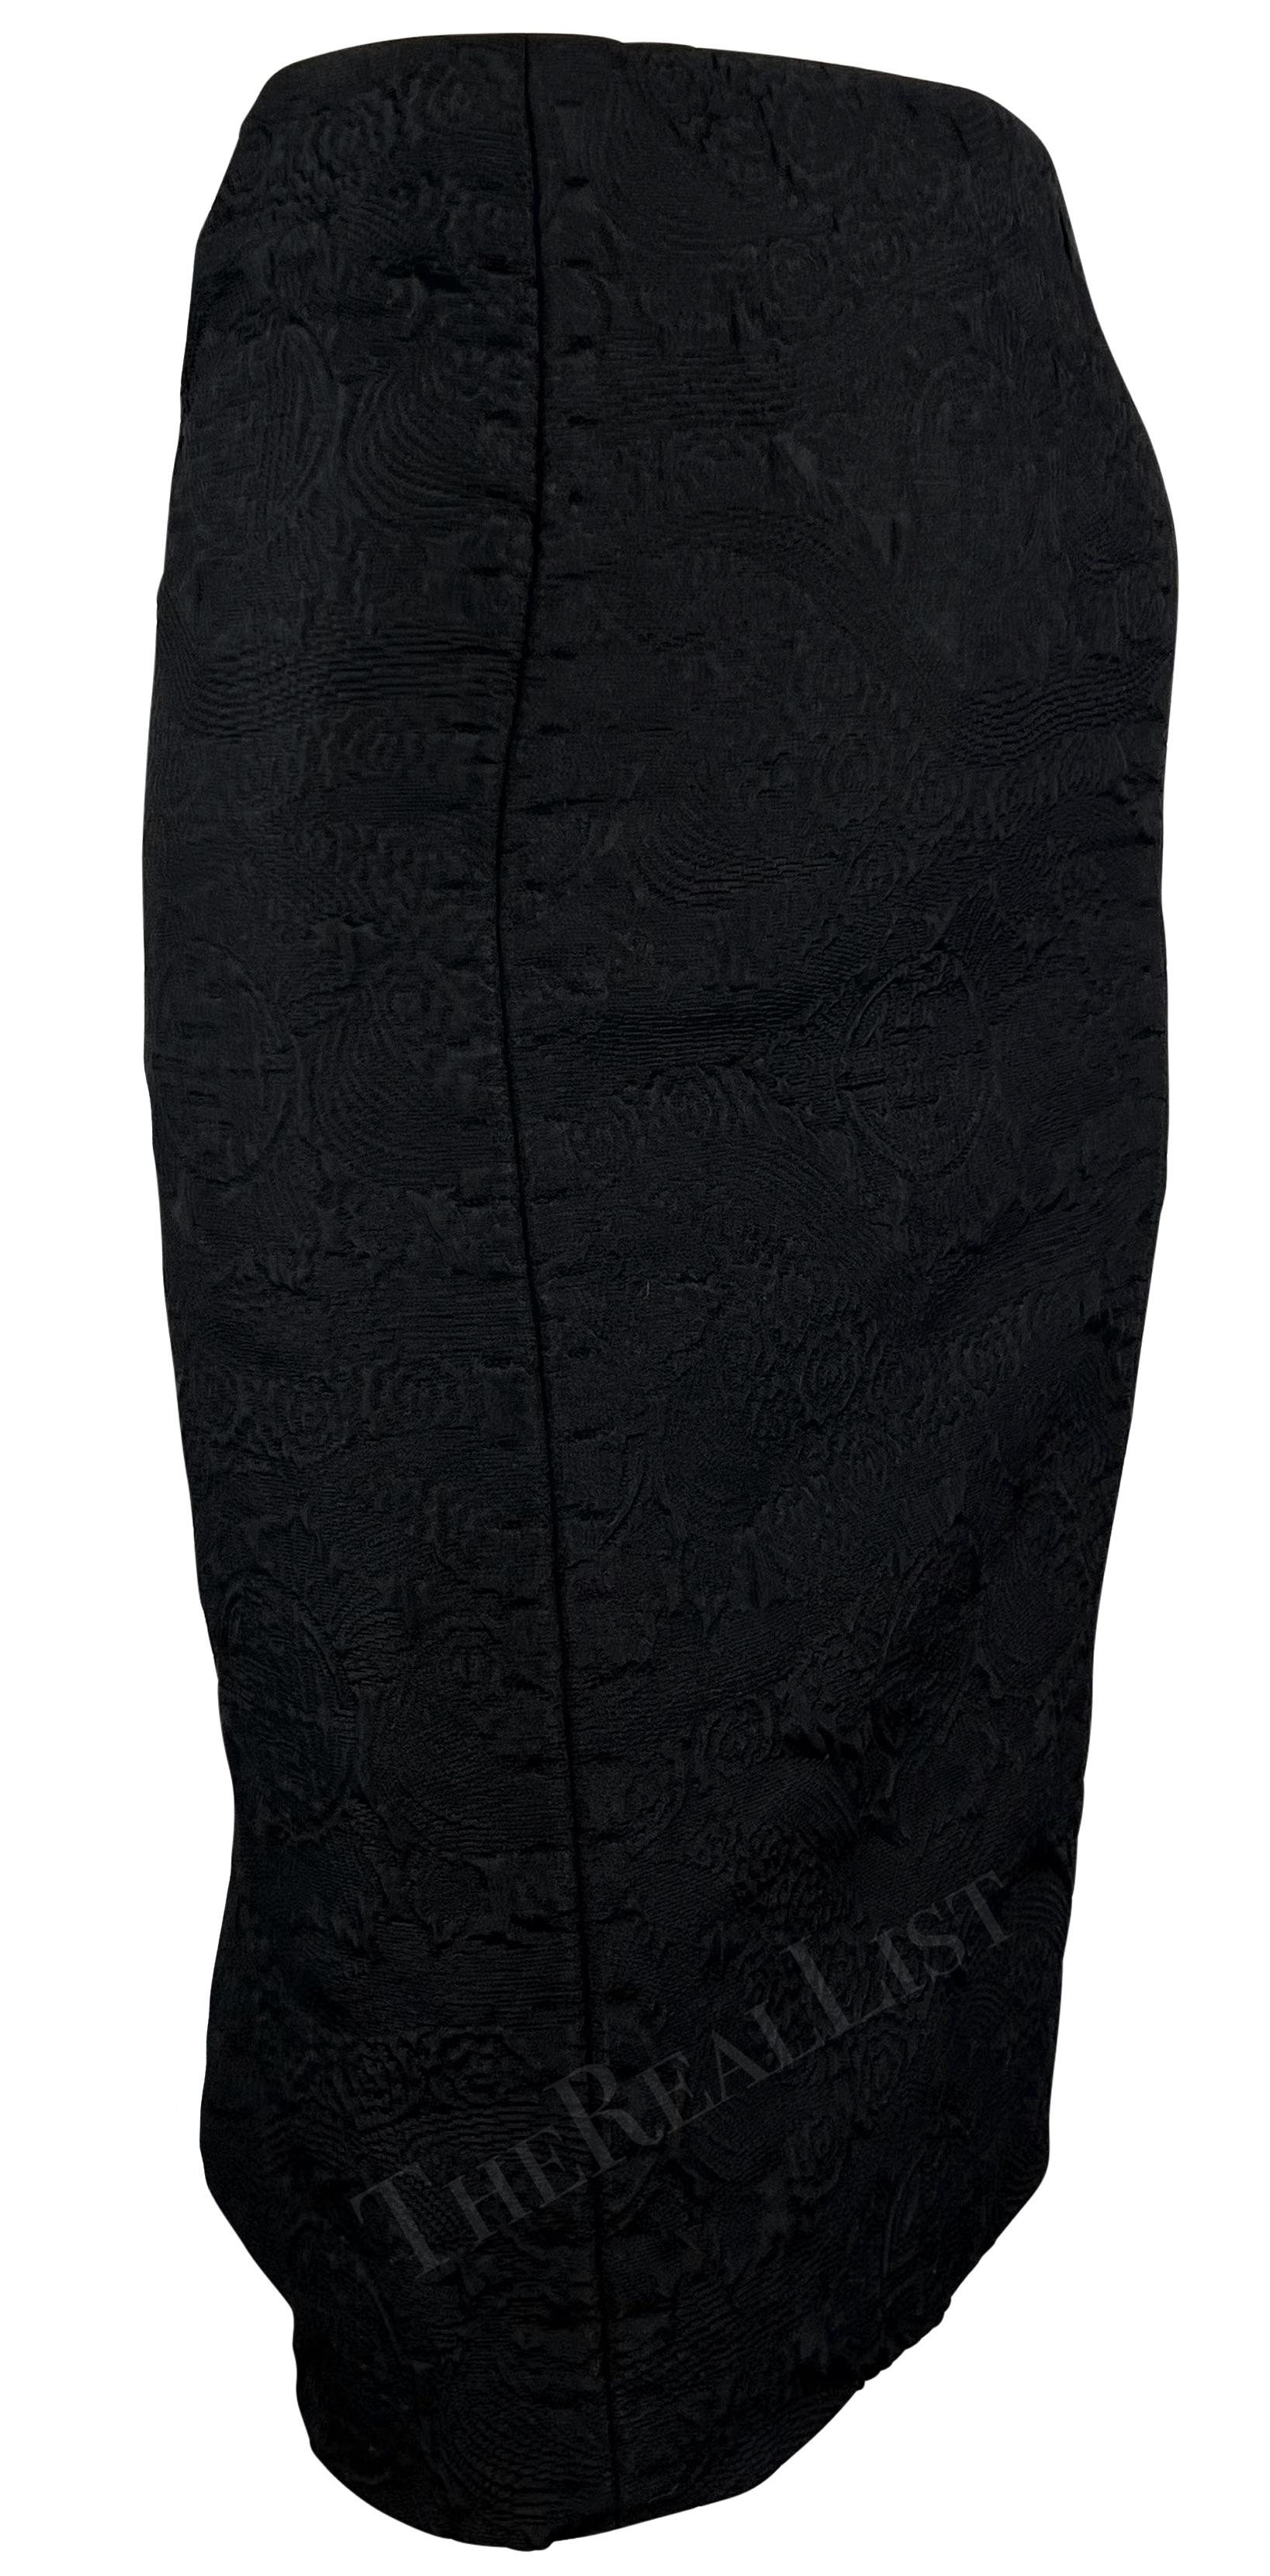 F/W 2004 Yves Saint Laurent by Tom Ford Chinoiserie Brocade Black Skirt For Sale 2